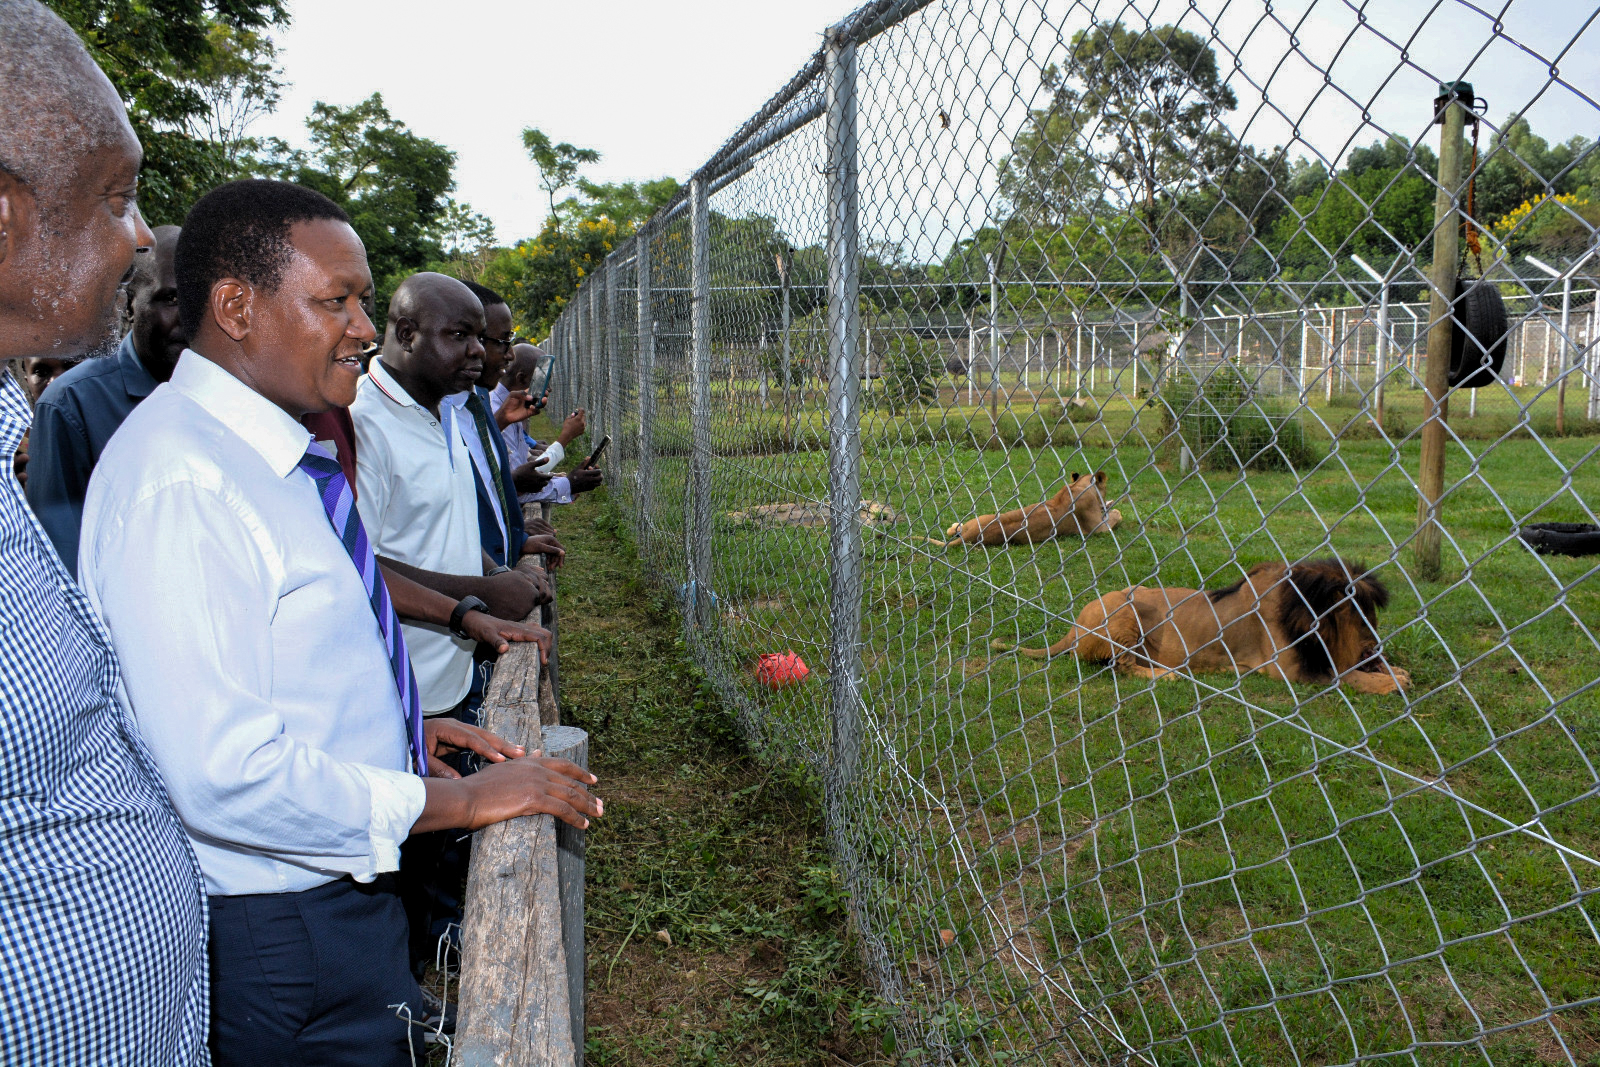 The Cabinet Secretary, Ministry of Tourism and Wildlife, Dr. Alfred Mutua (white shirt & tie), together with other officials during his visit at the Buteyo Miti Park Conservancy.